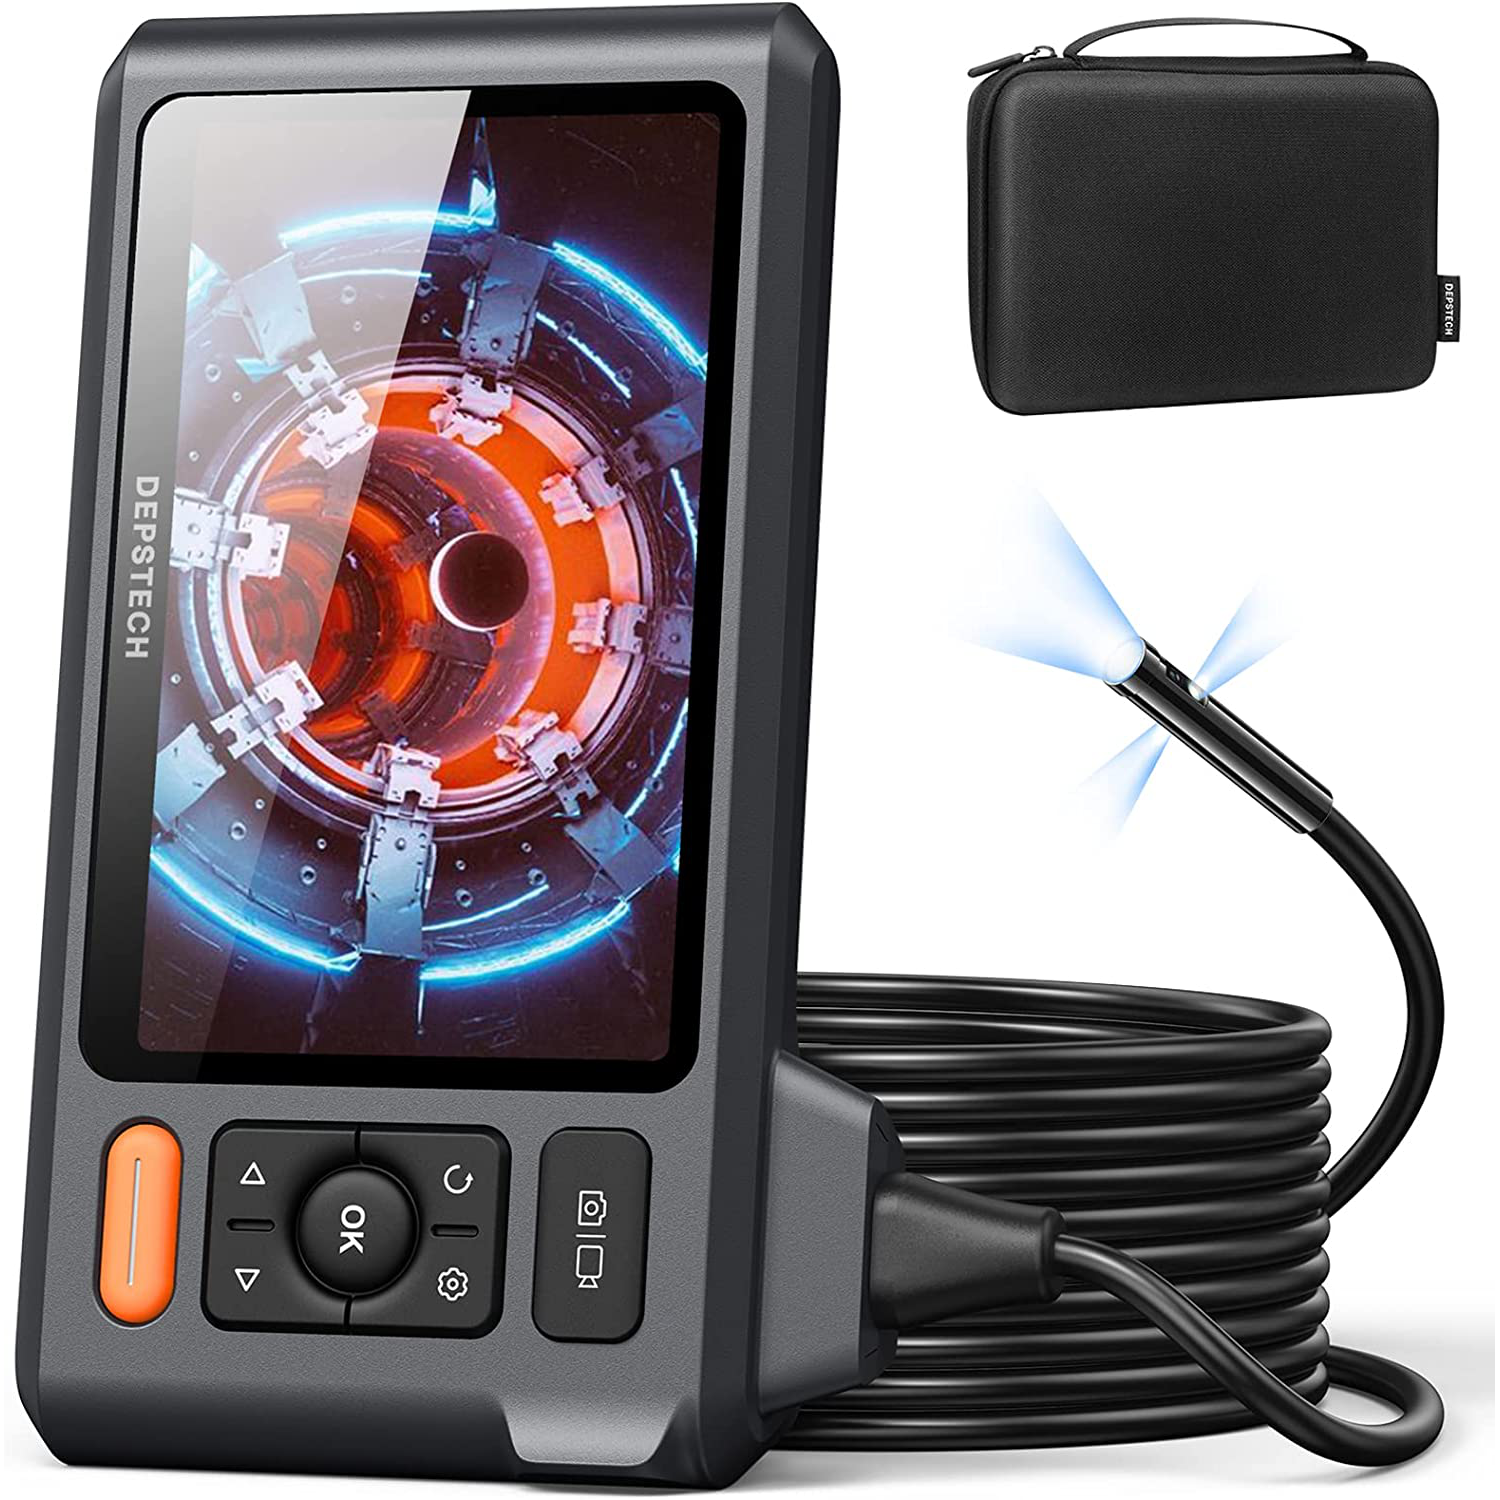 Triple Lens 1080p Borescope Inspection Camera with 5